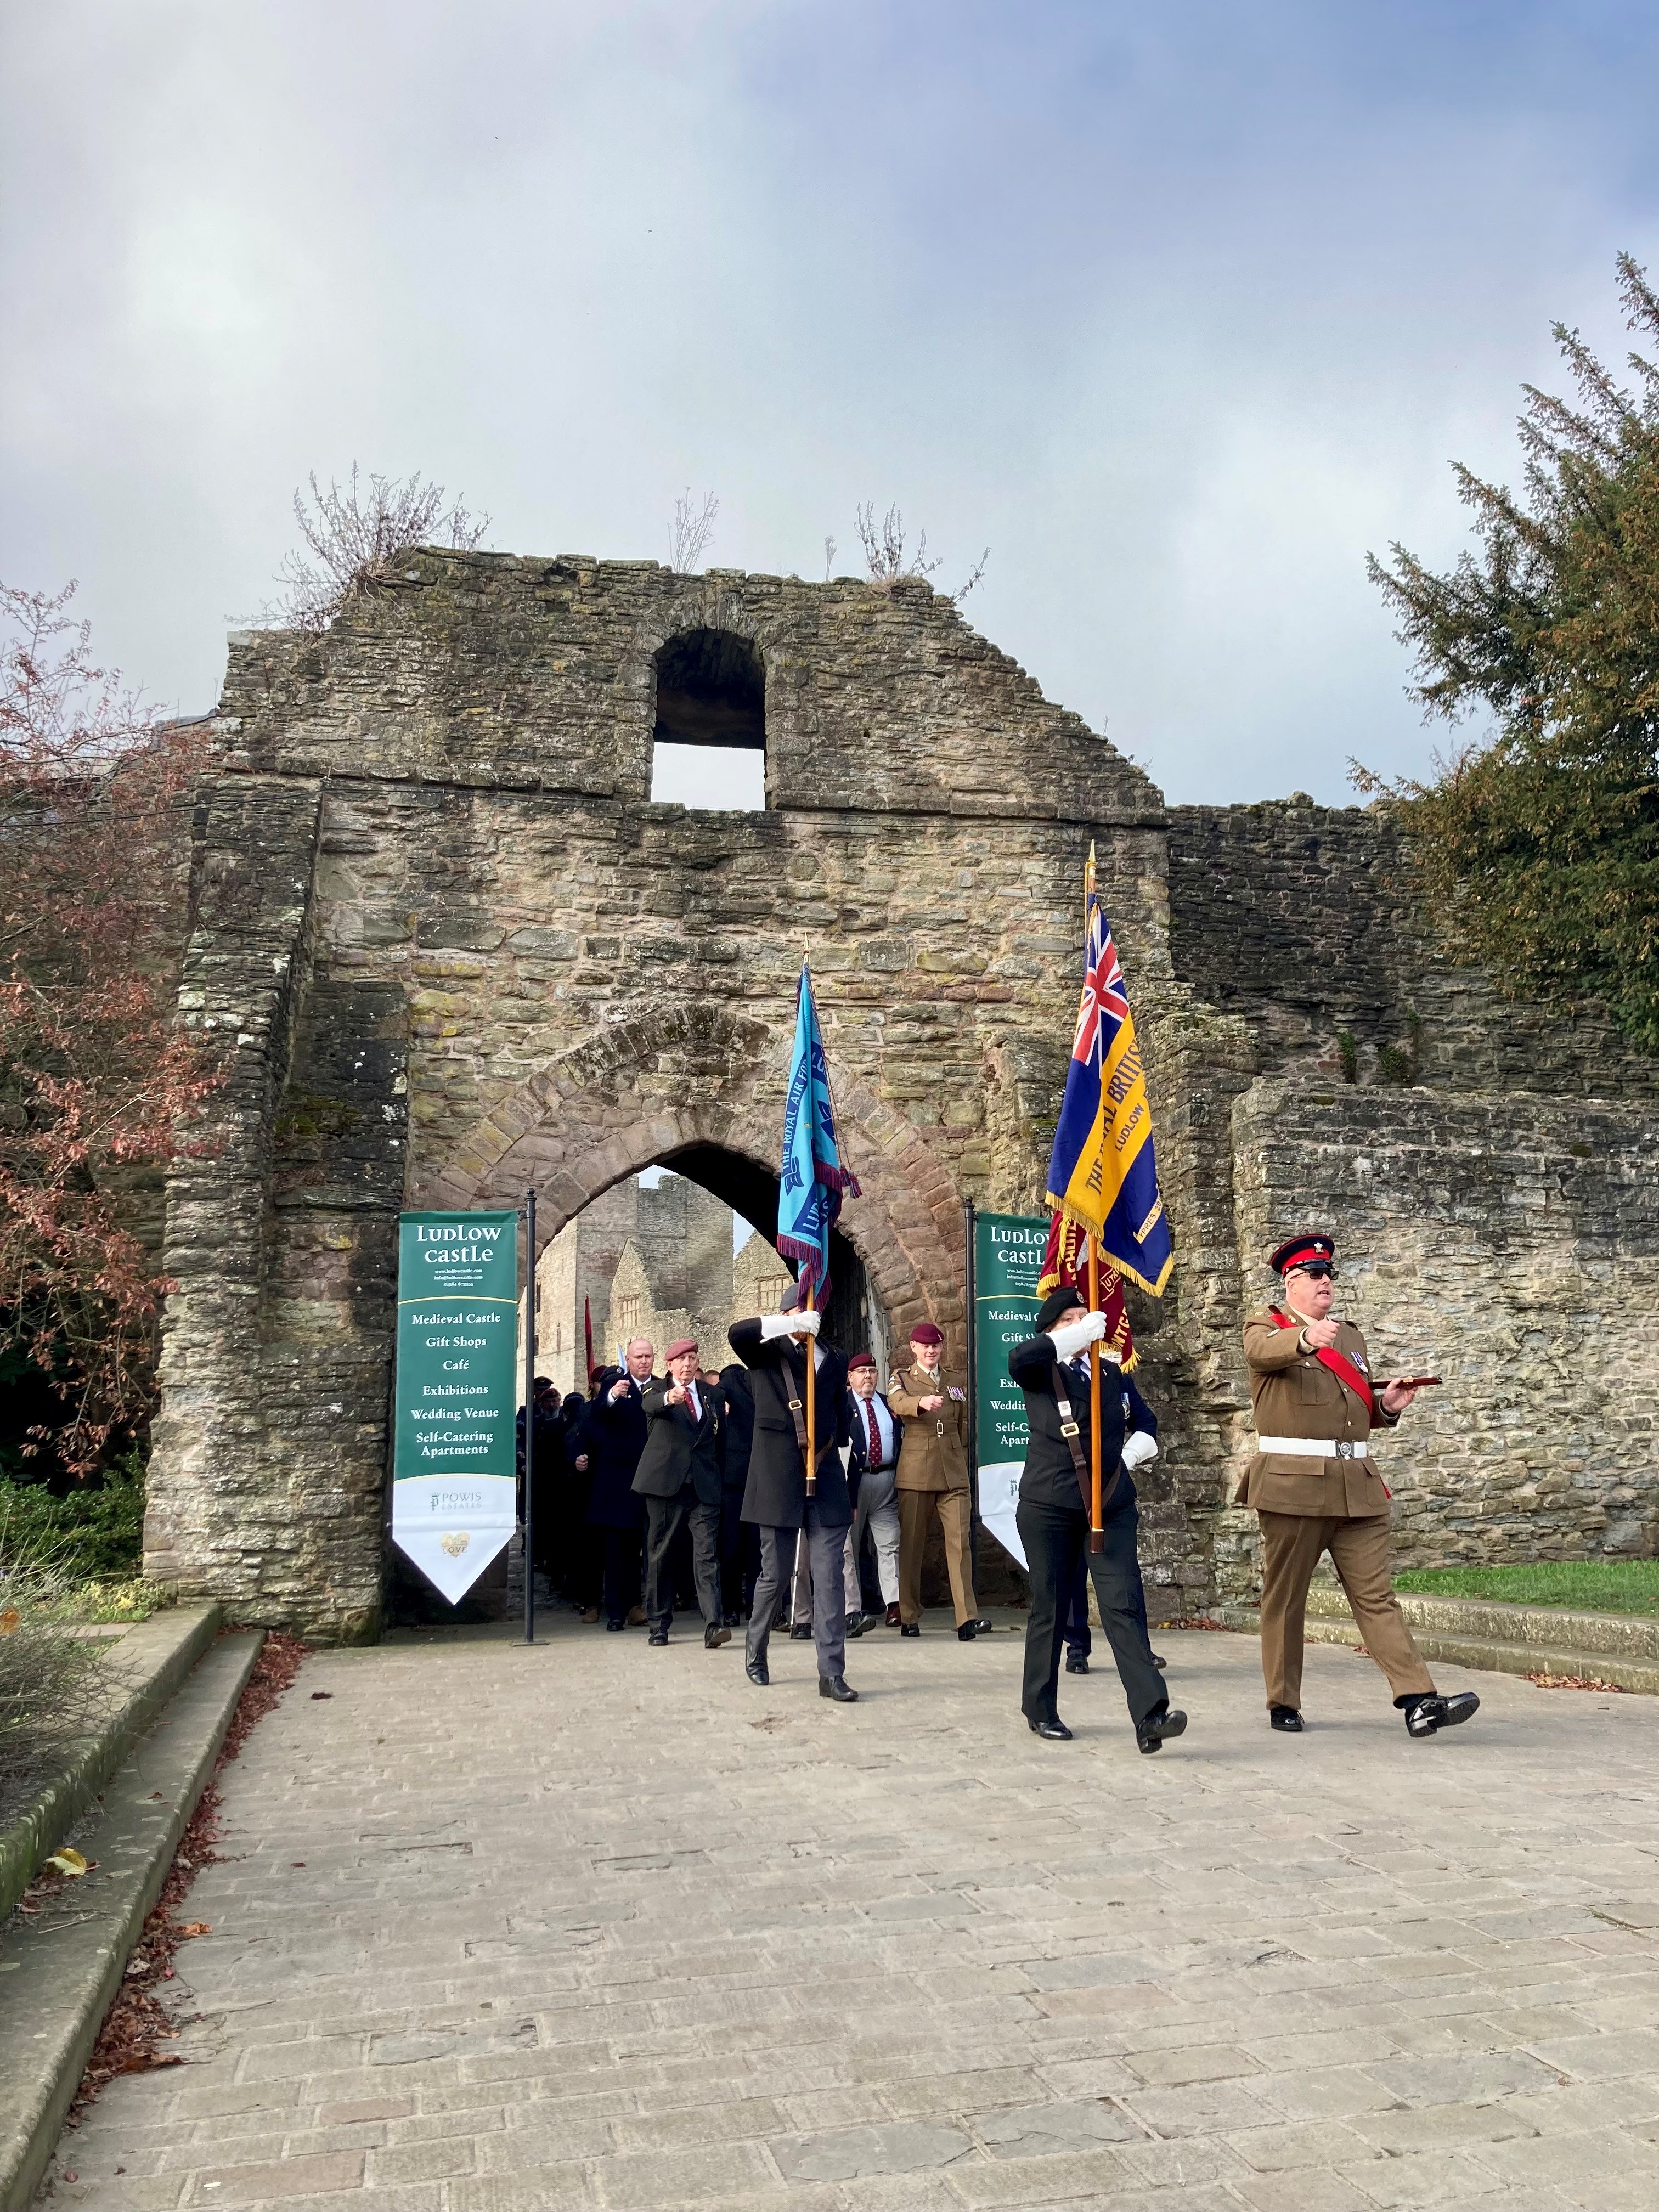 the parade marshall and standard bearers lead the parade through the castle gate